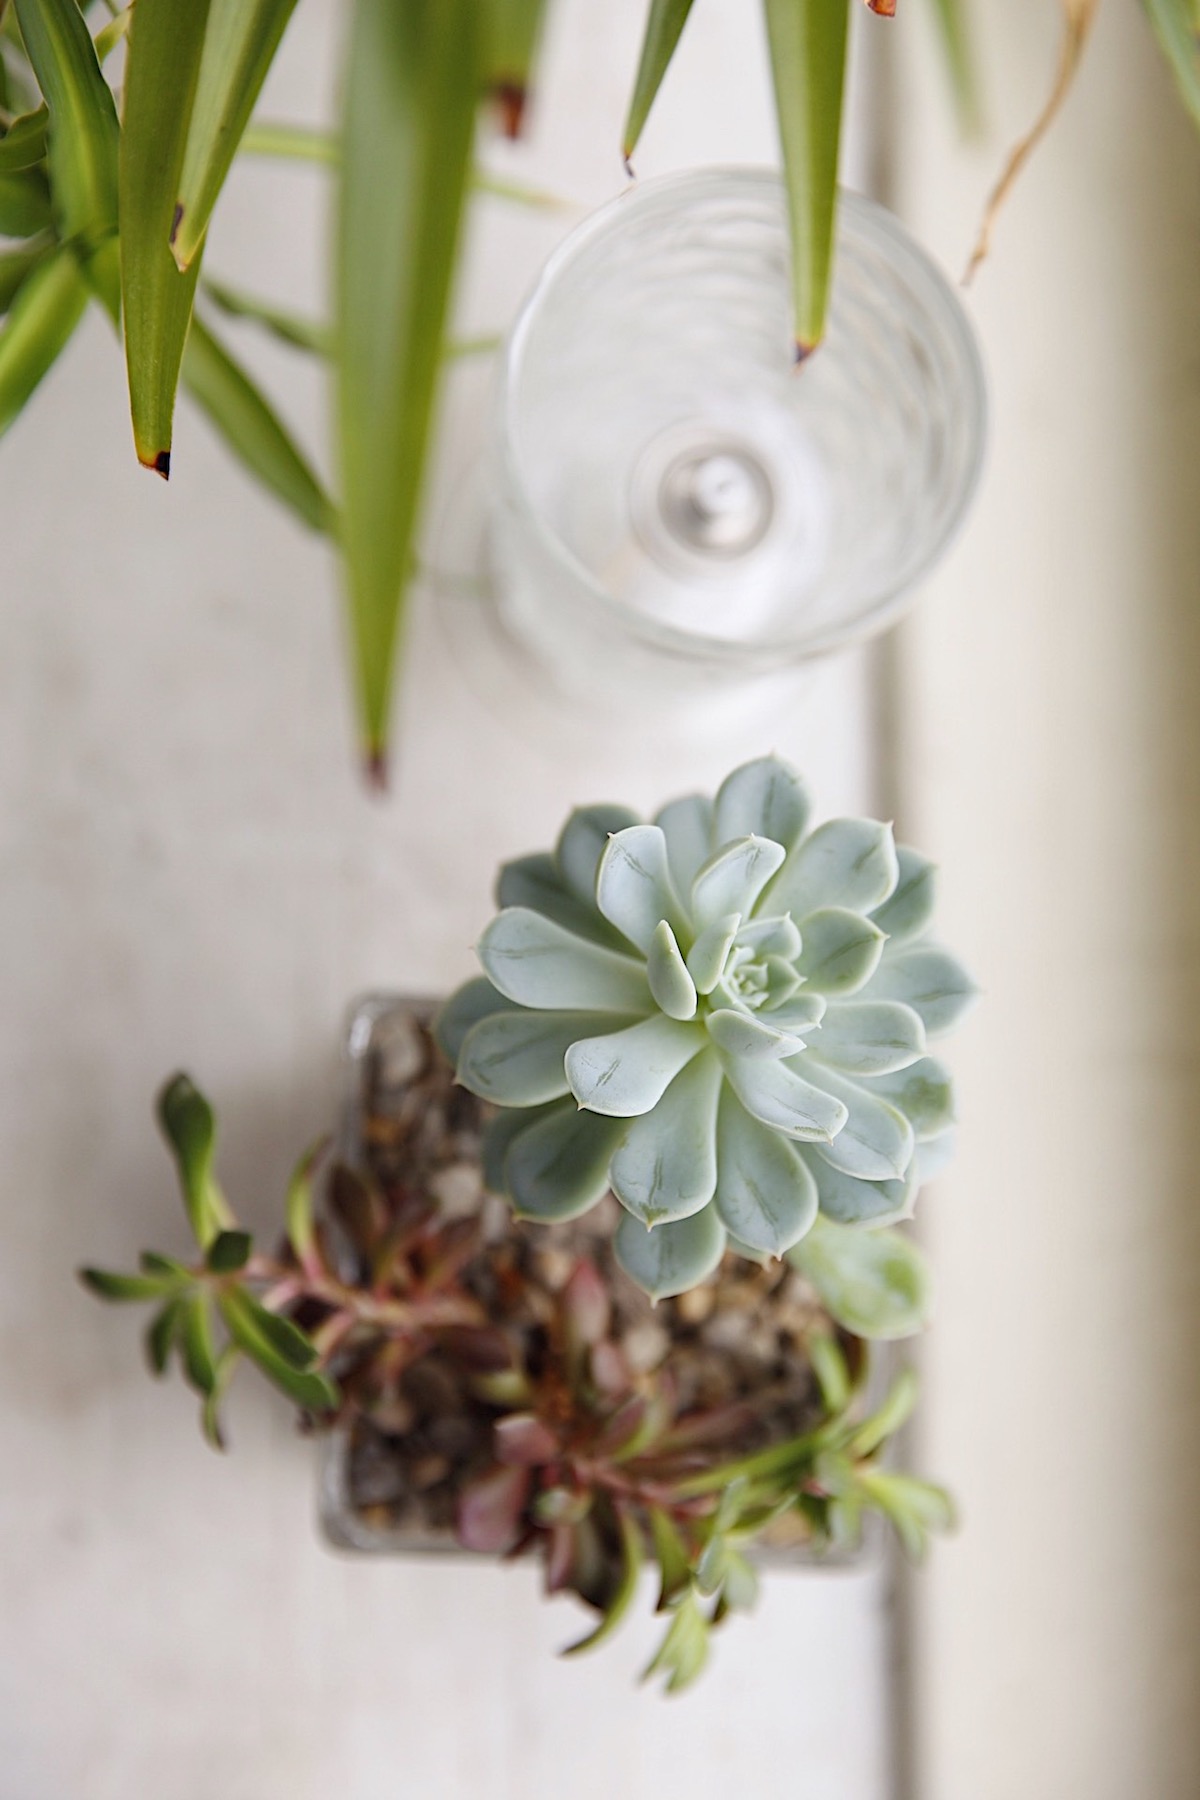 Succulent on Table